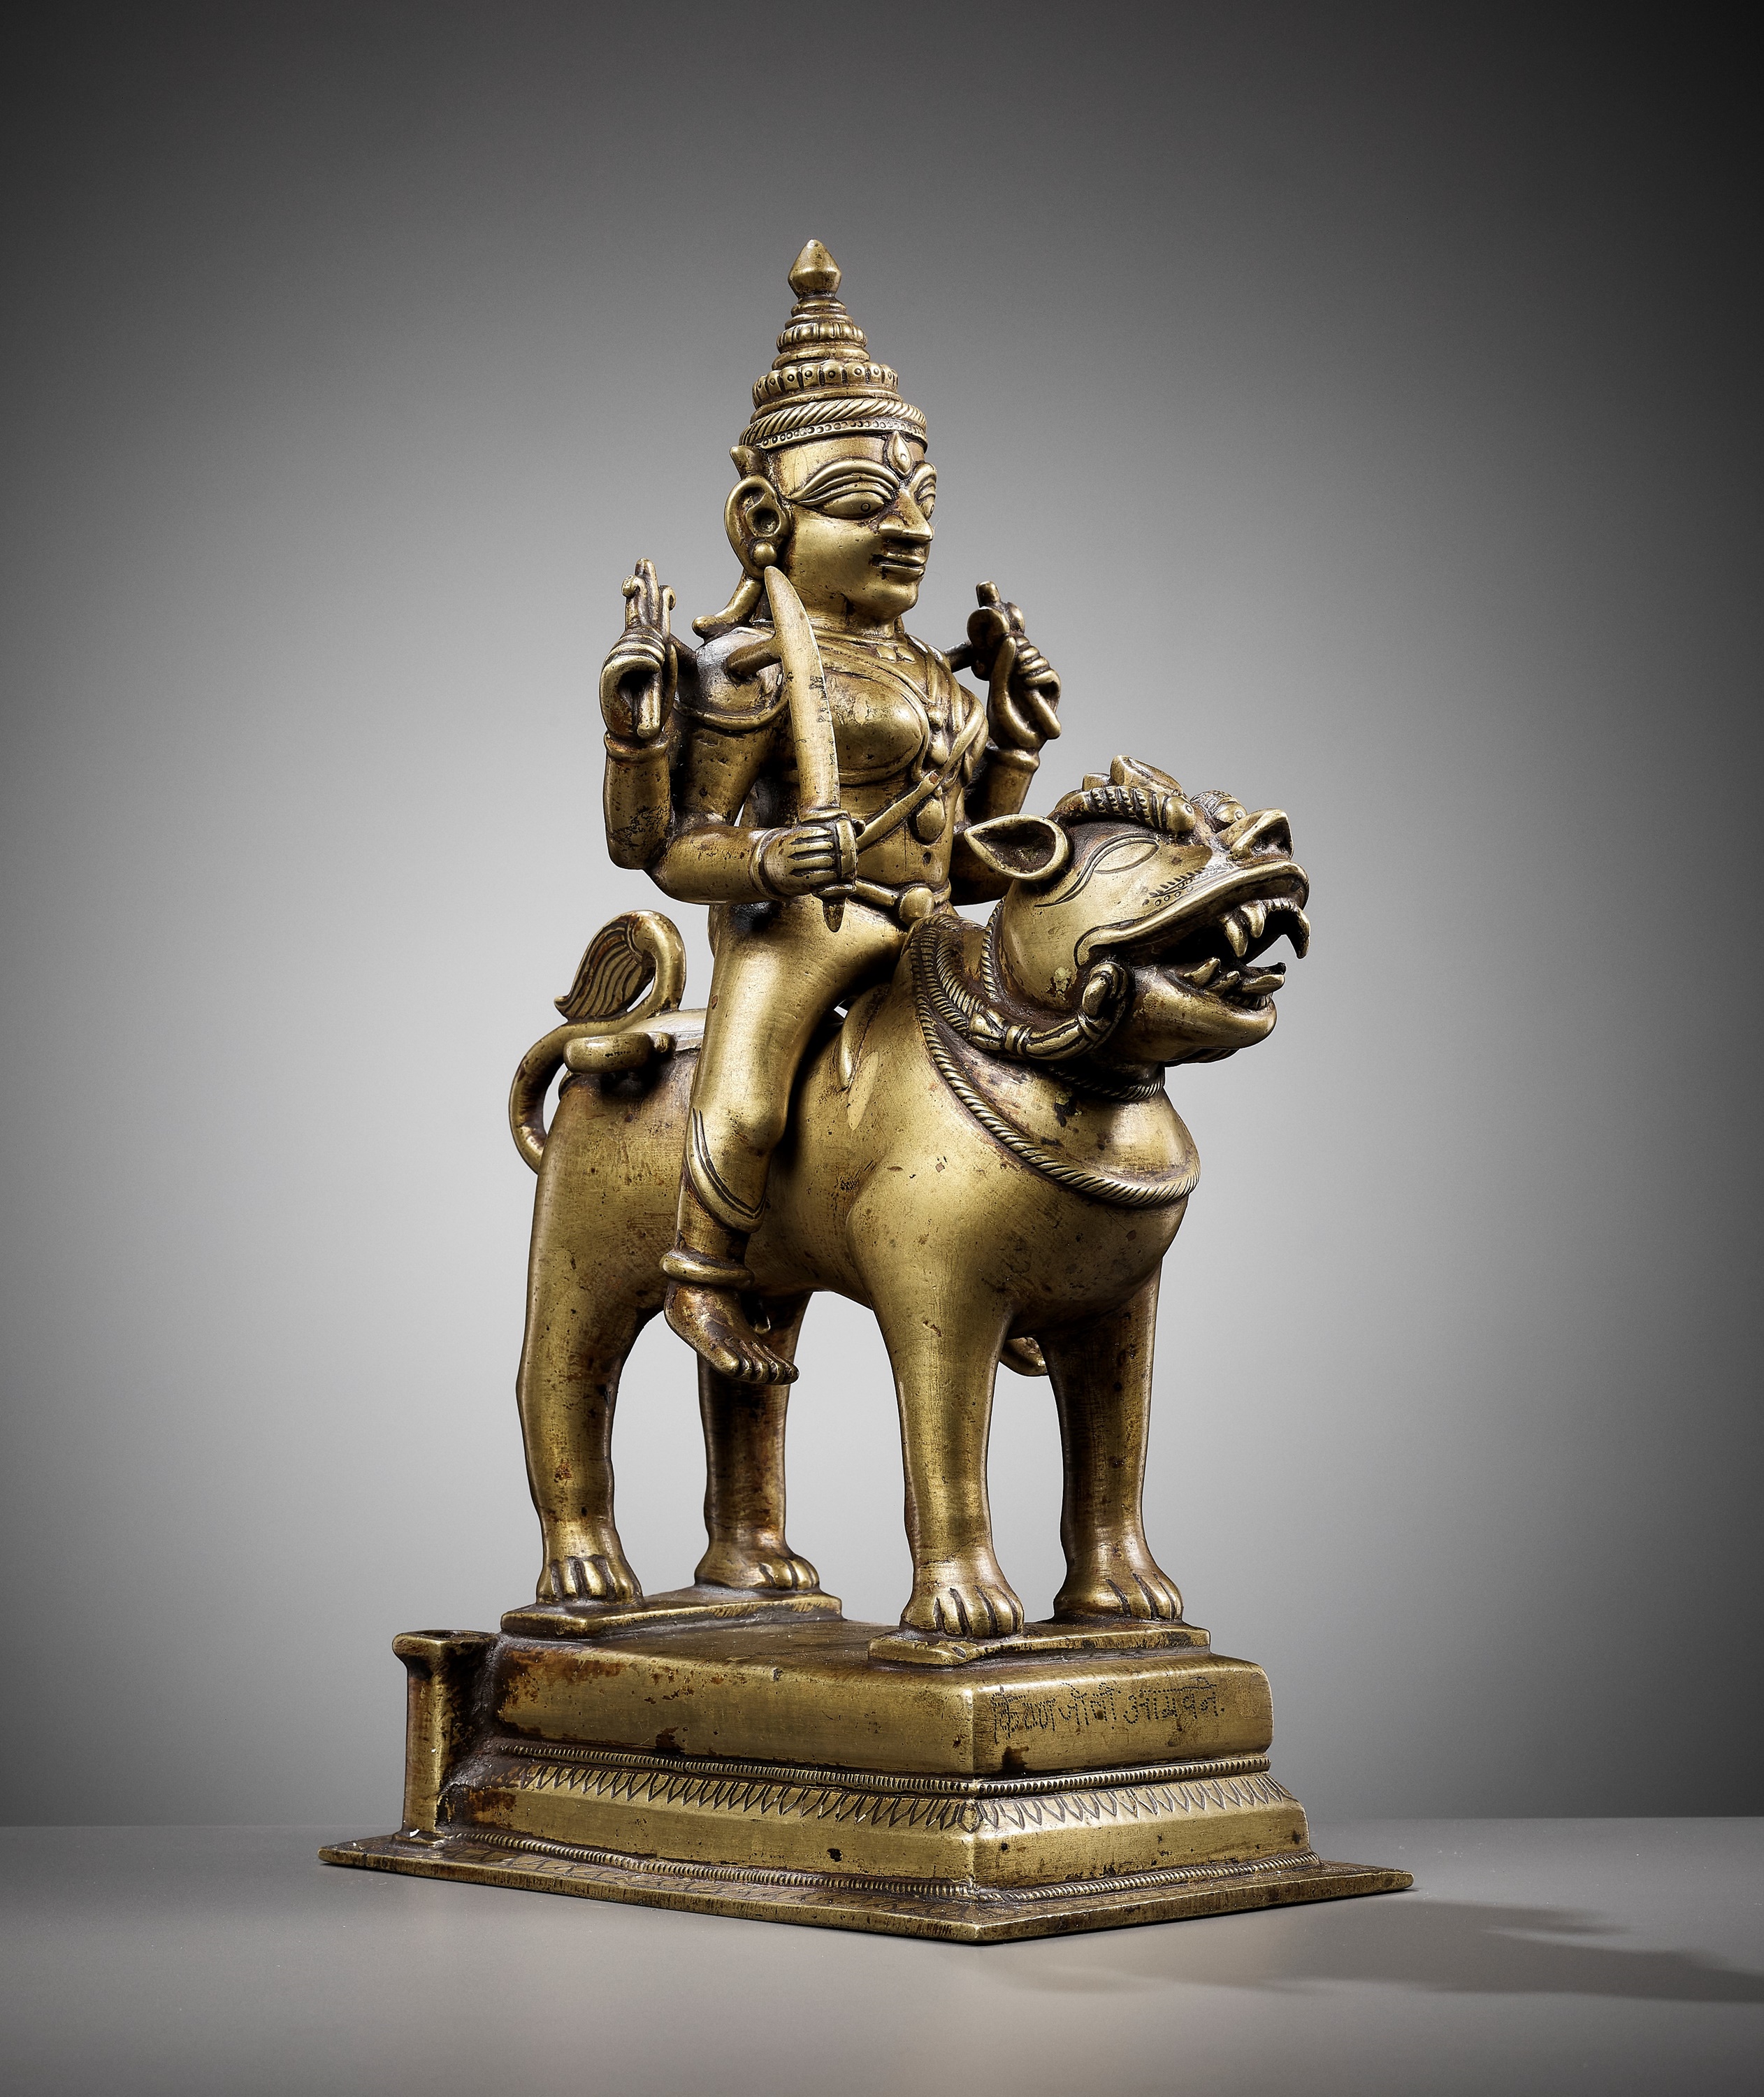 A BRONZE FIGURE OF DURGA RIDING A LION, INDIA, 15TH CENTURY - Image 2 of 11